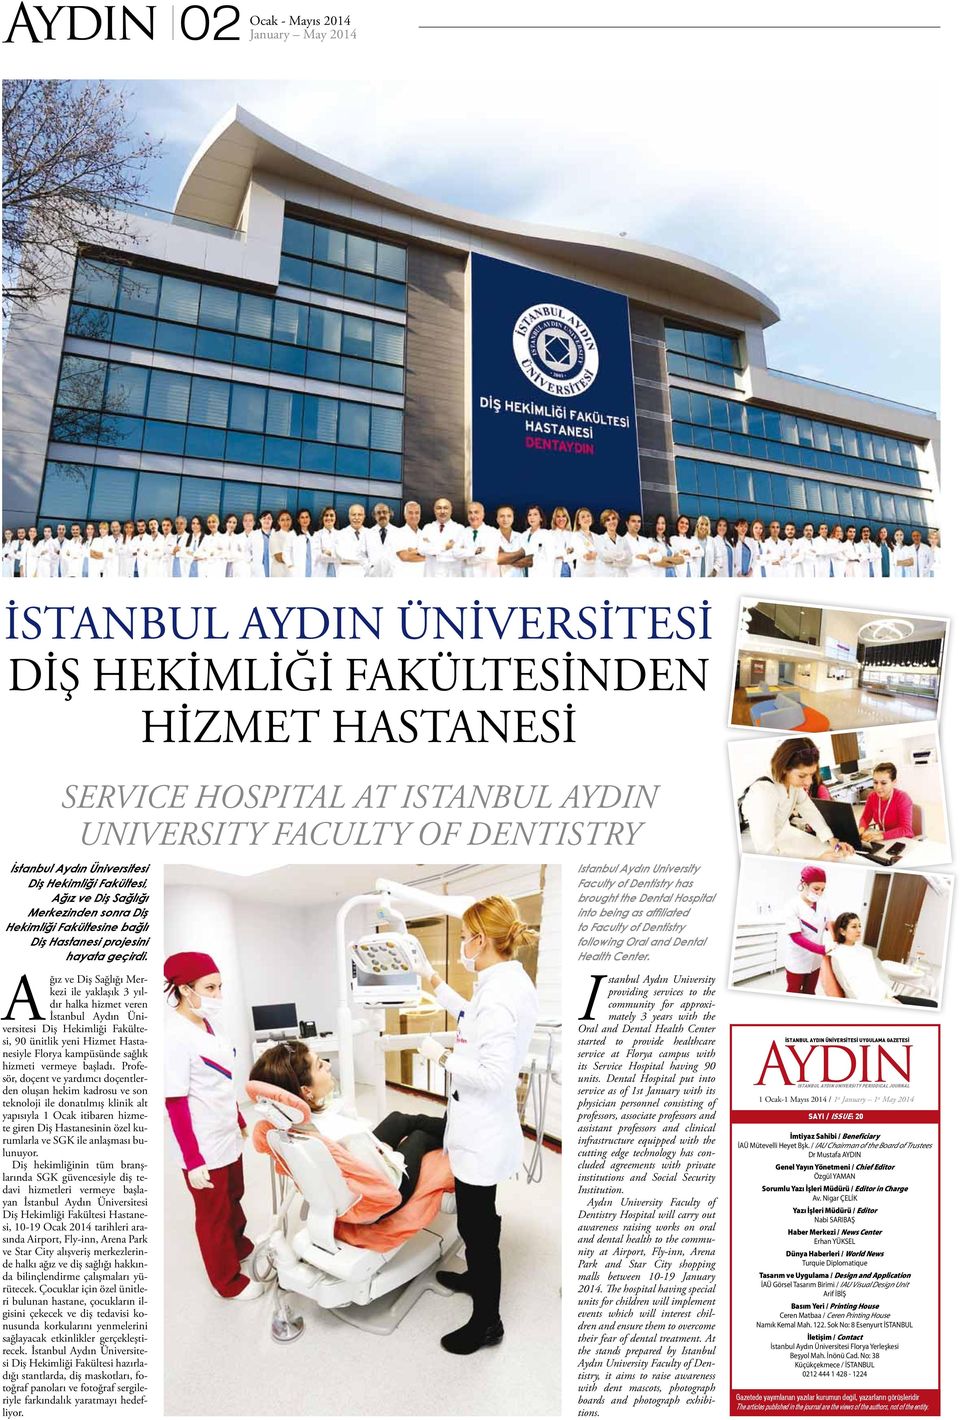 Istanbul Aydın University Faculty of Dentistry has brought the Dental Hospital into being as affiliated to Faculty of Dentistry following Oral and Dental Health Center.